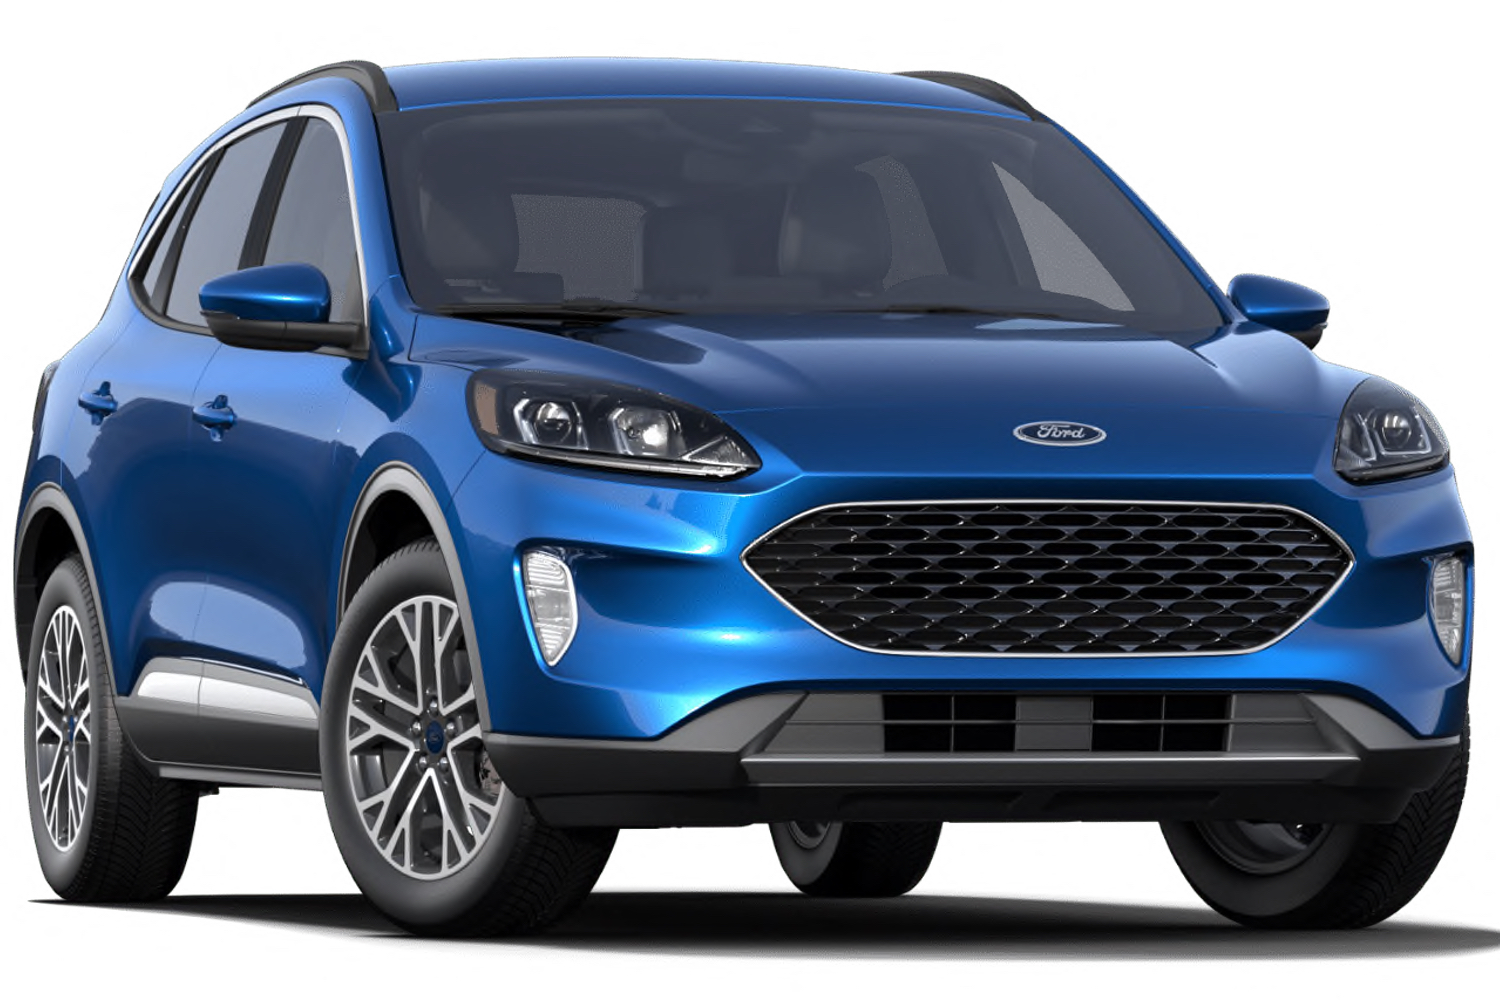 2020 Ford Escape Gets New Velocity Blue Color: First Look